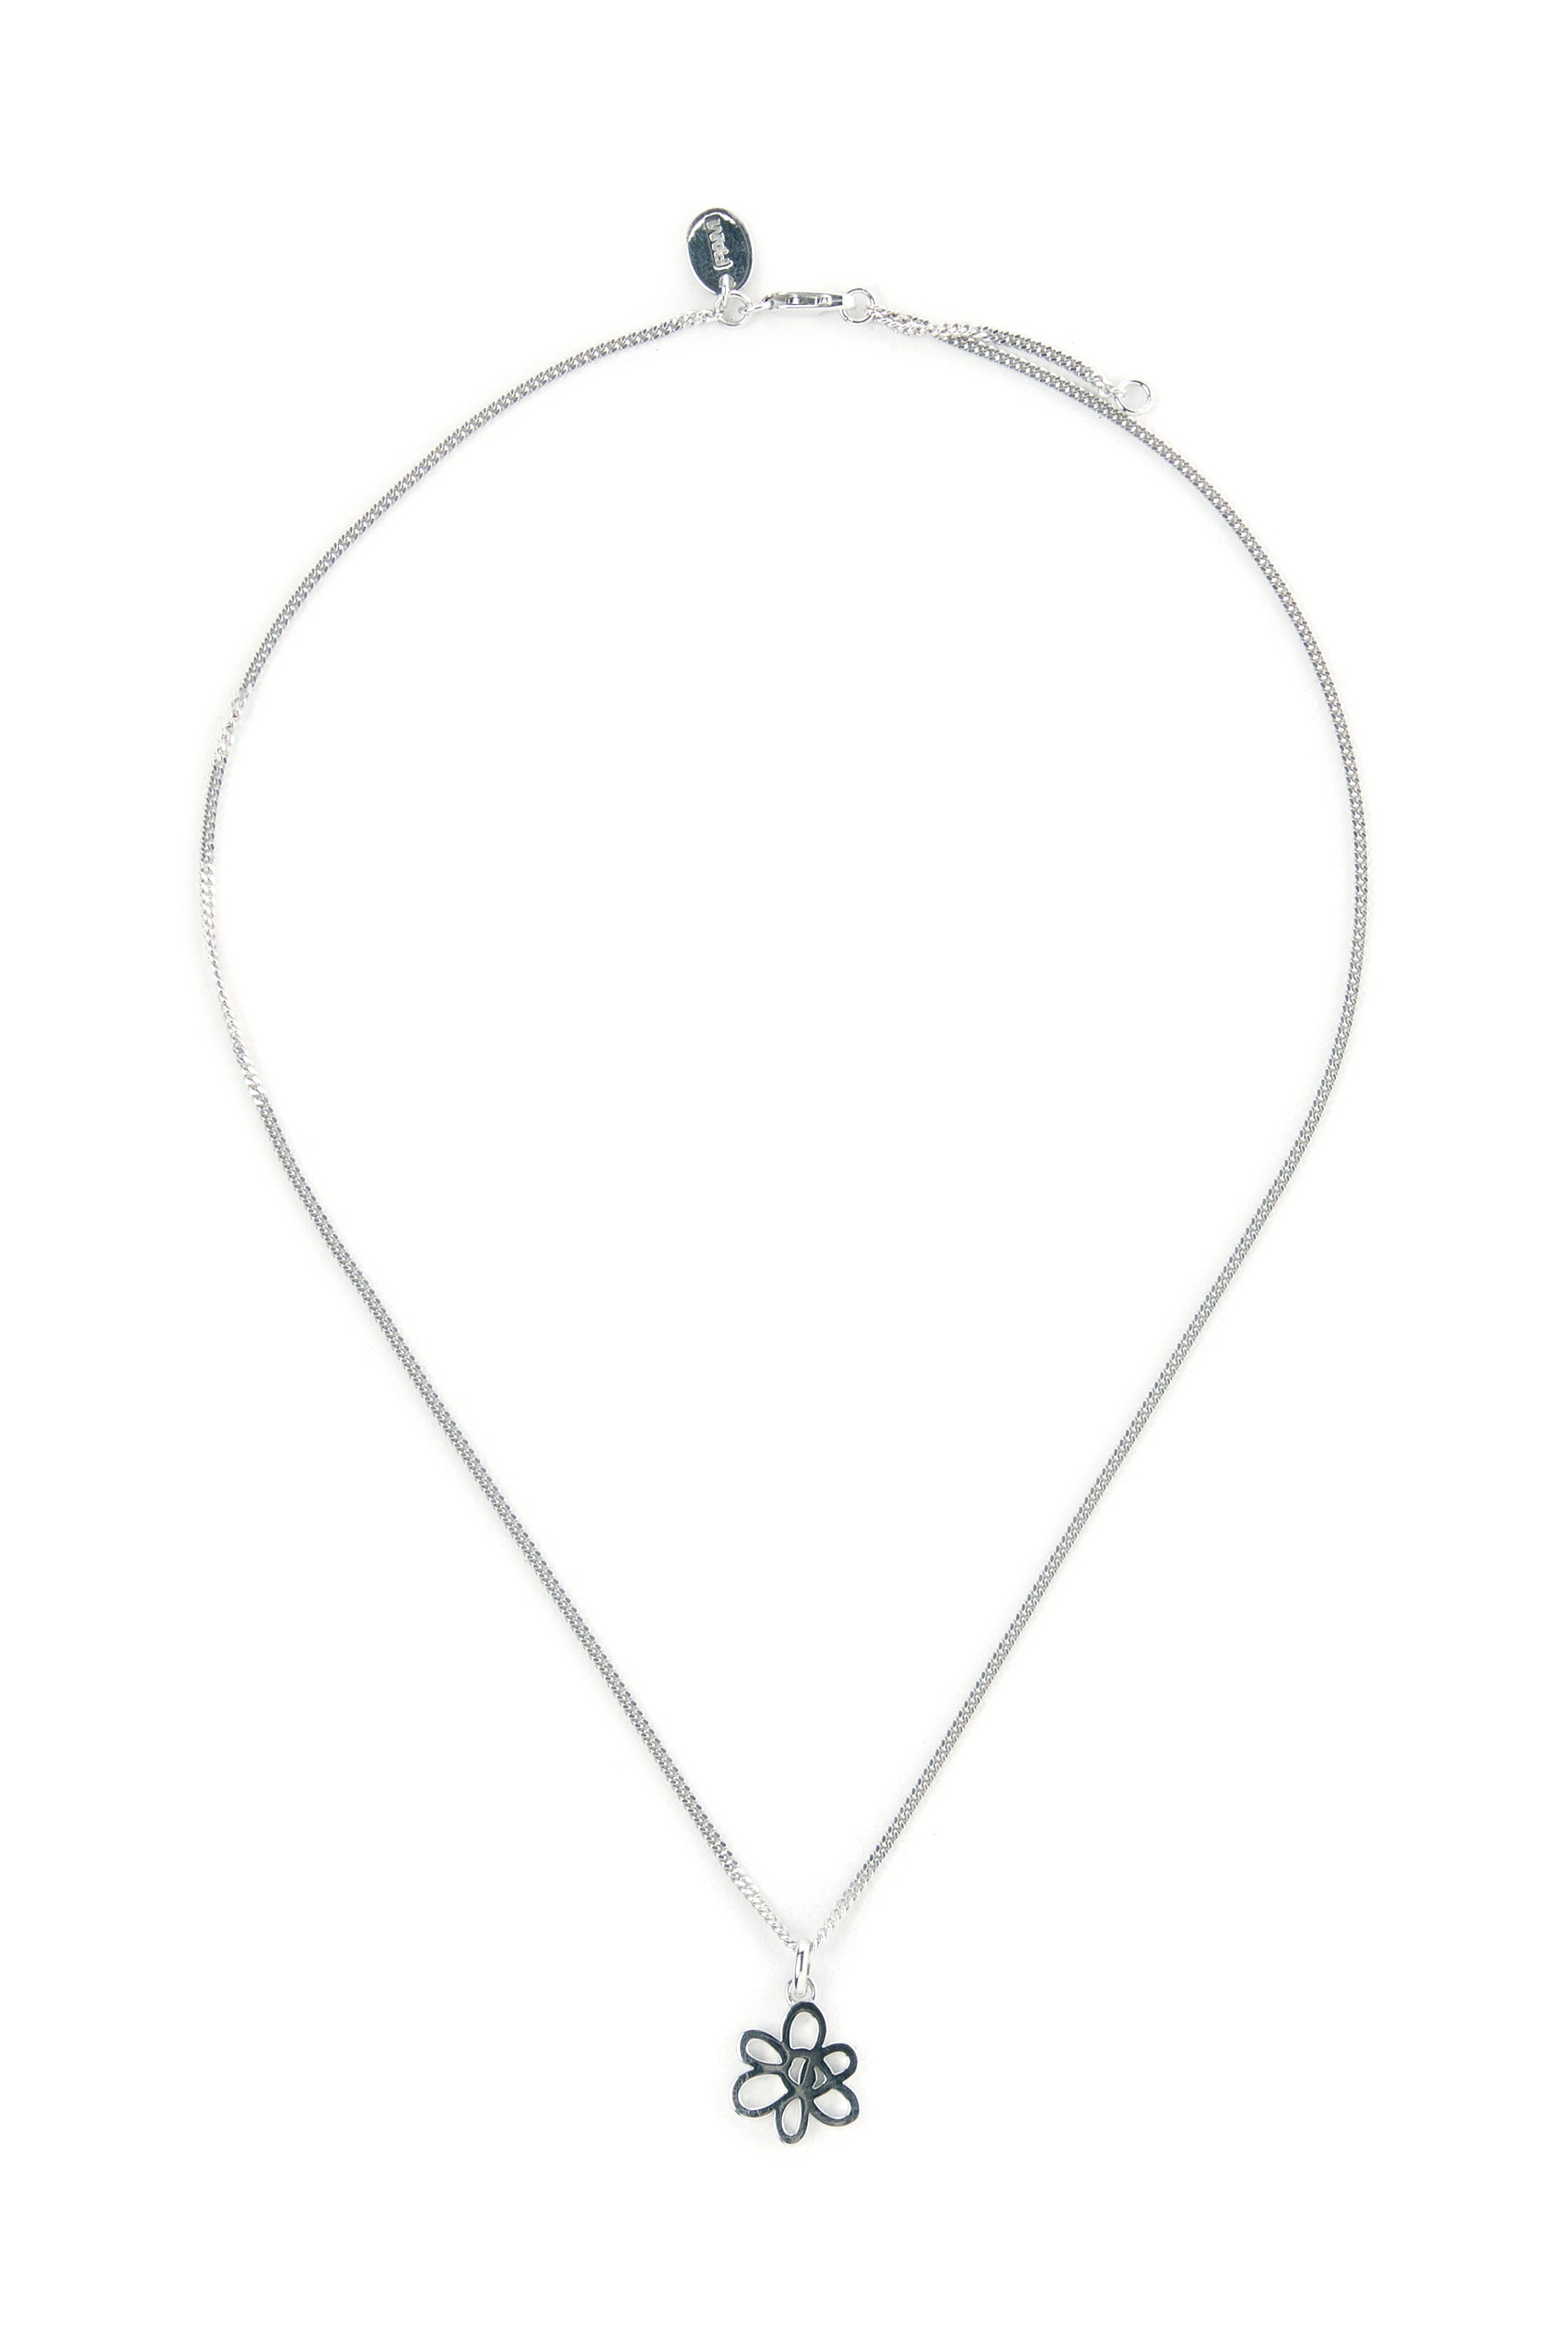 The GATEWAY FRAME SILVER GESTURE NECKLACE  available online with global shipping, and in PAM Stores Melbourne and Sydney.